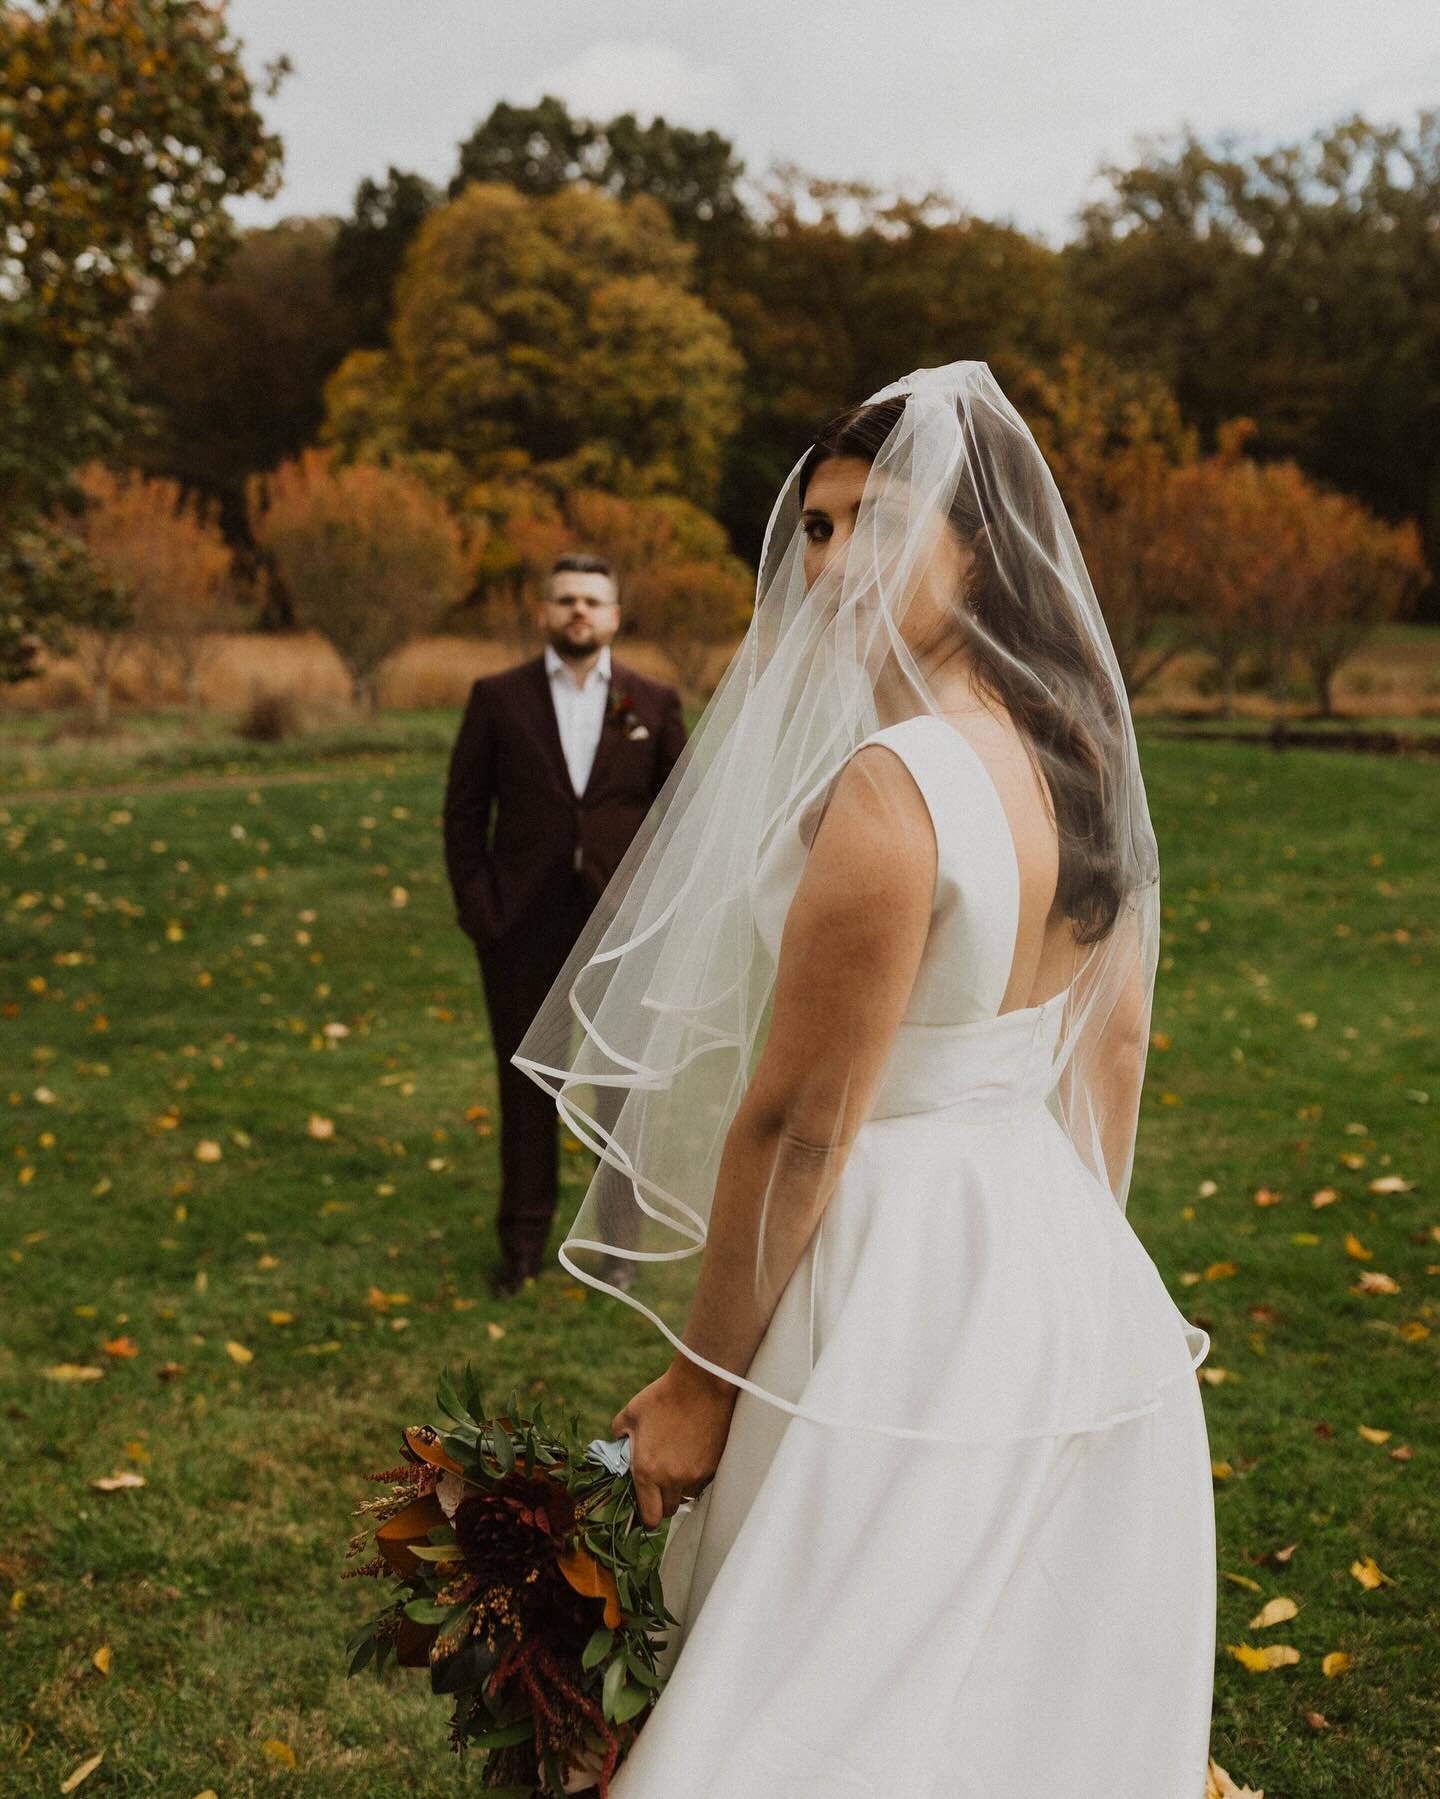 The most perfect weather for the most perfect fall wedding 🍂🍁 associate shot for @allimcgrathphoto 🧡